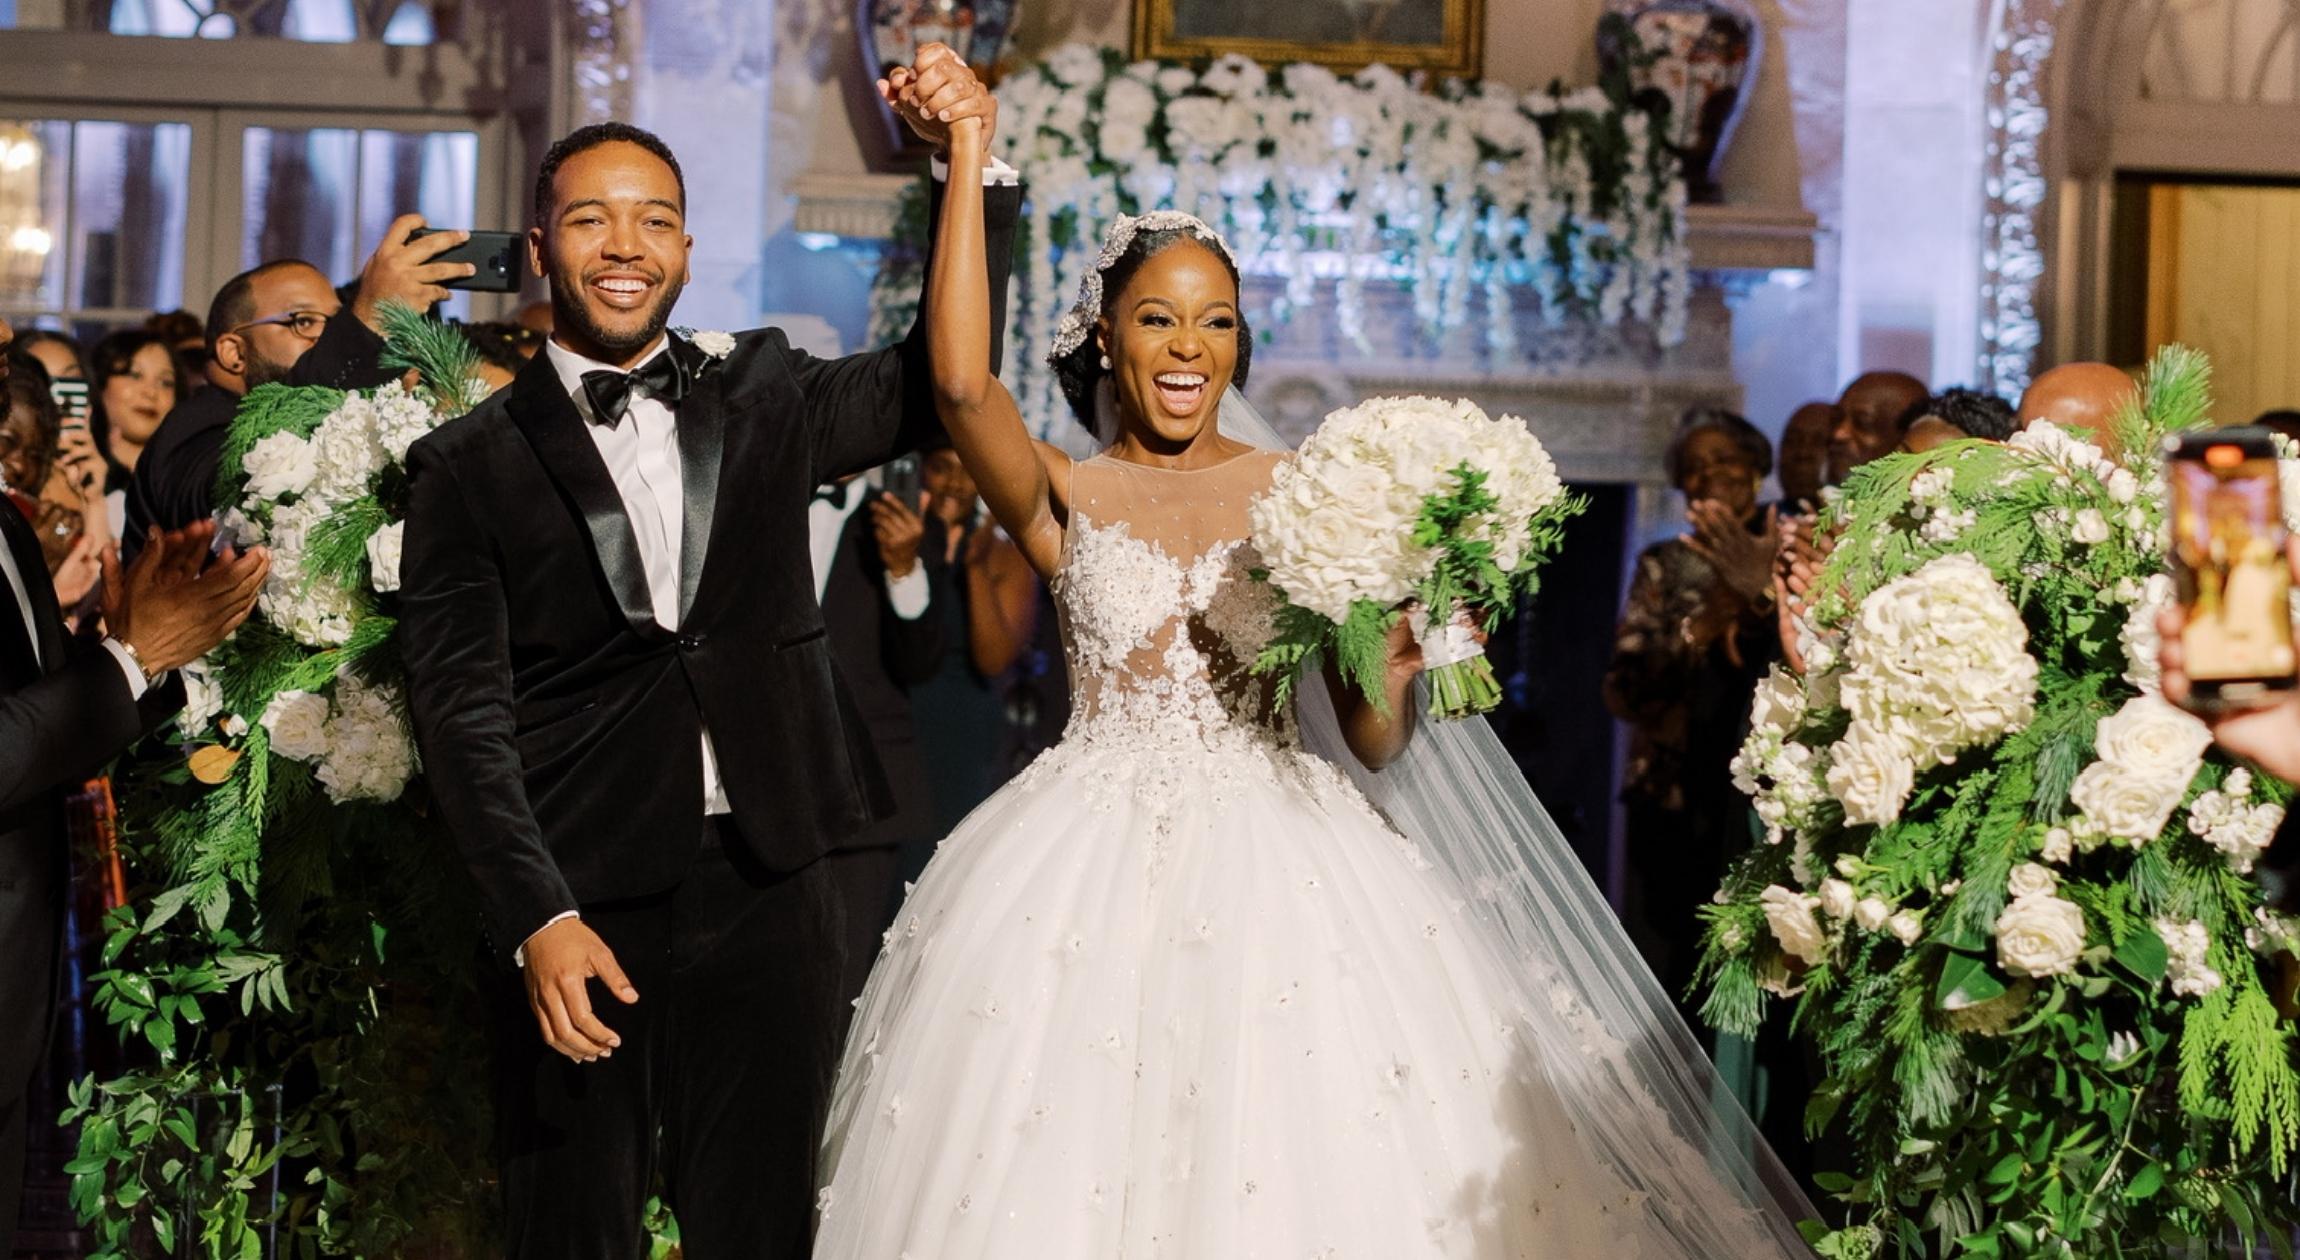 A Black man in a tuxedo holding hands with a Black woman in a wedding dress that is in the ballgown silhouette